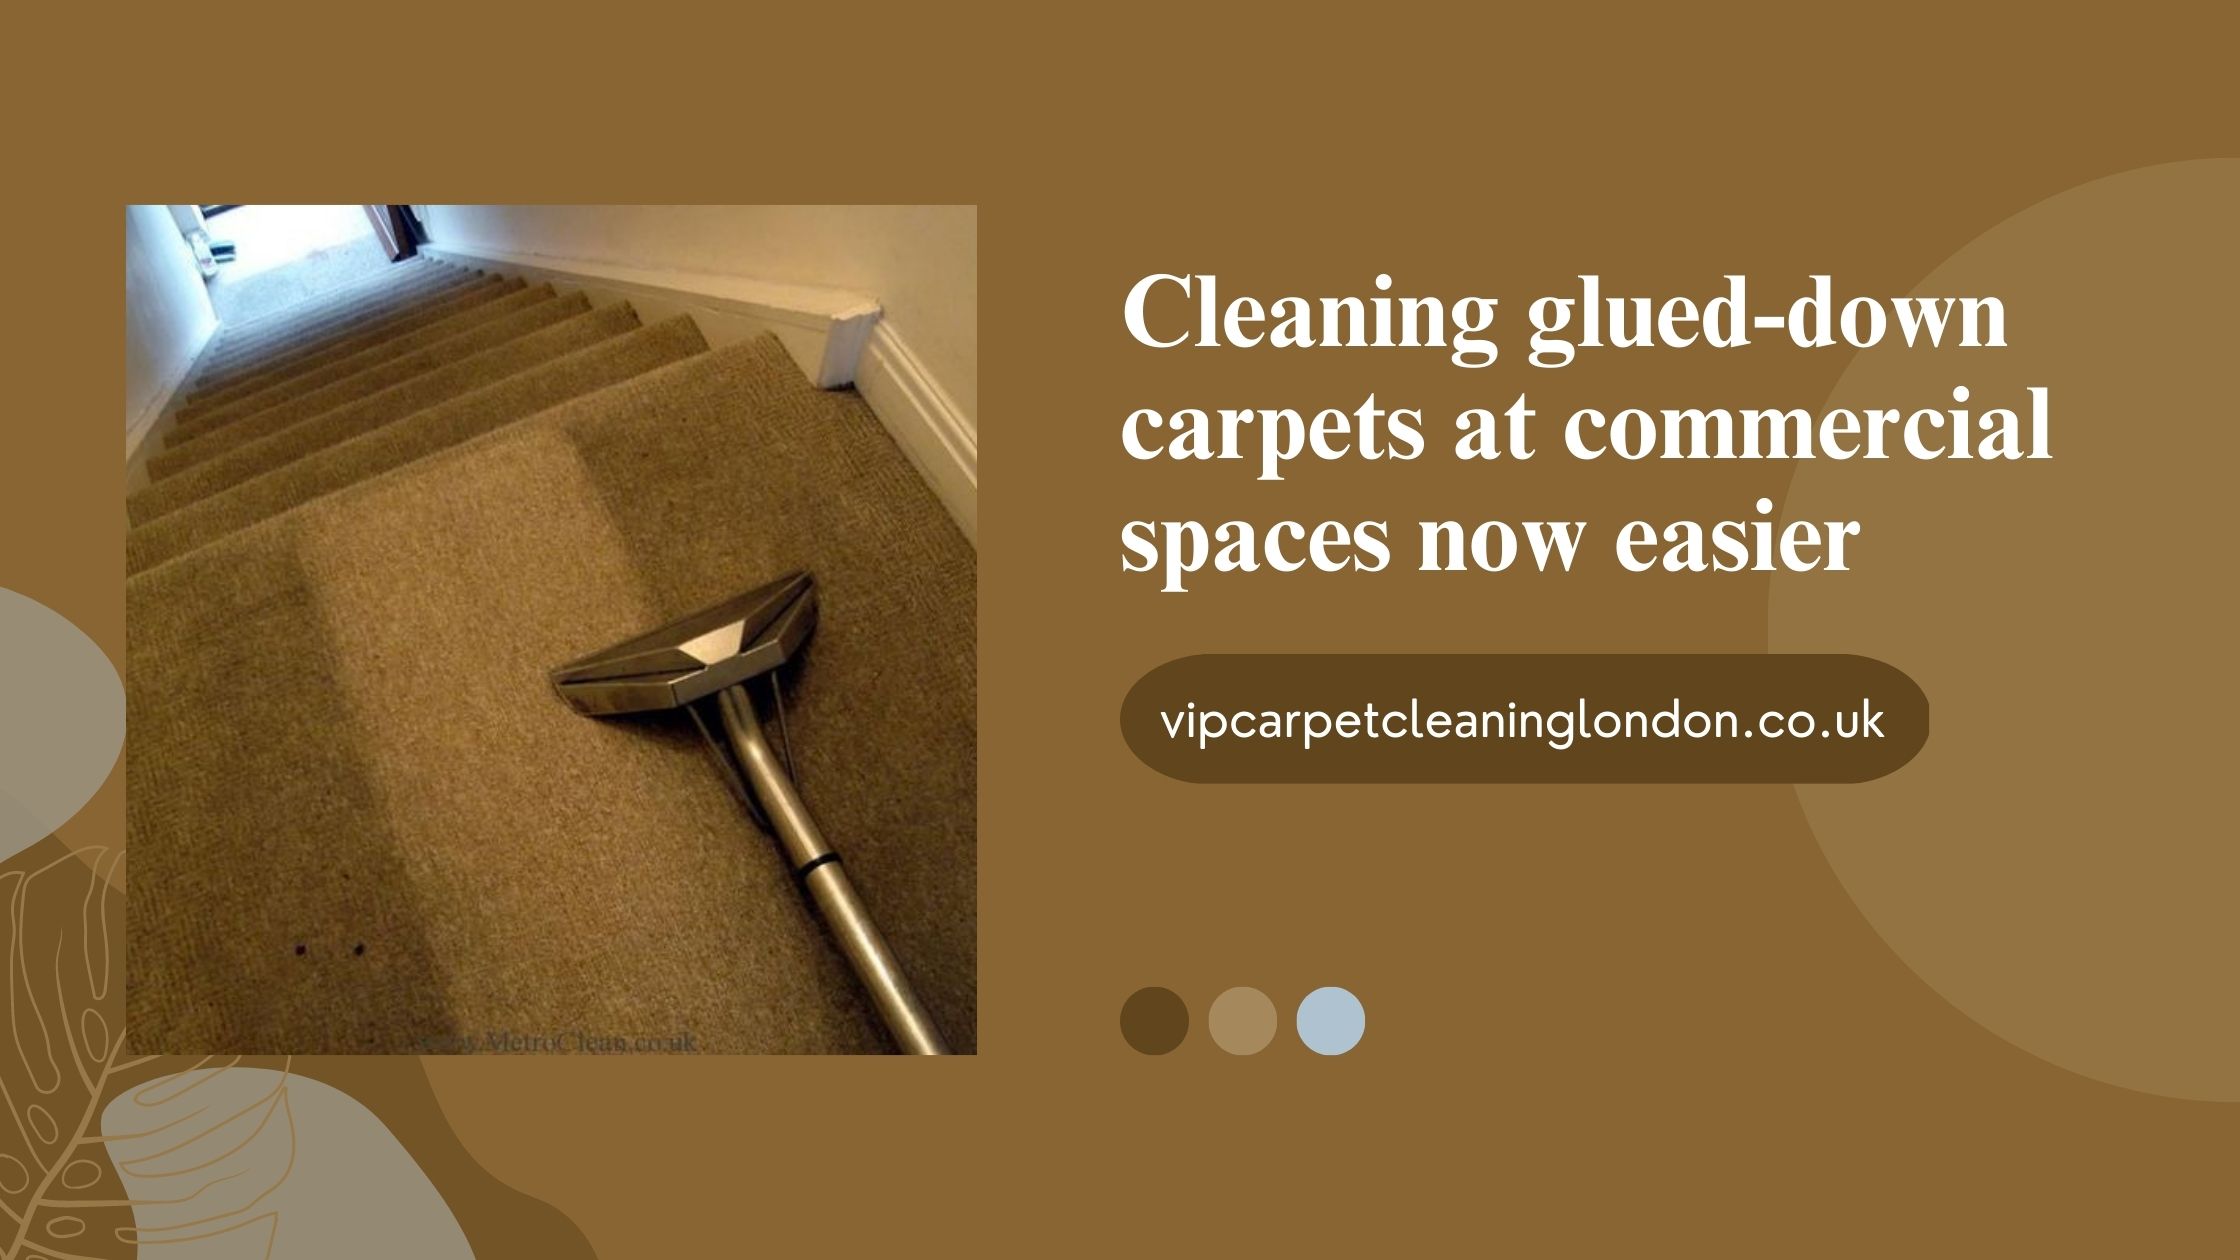 Cleaning glued-down carpets at commercial spaces now easier